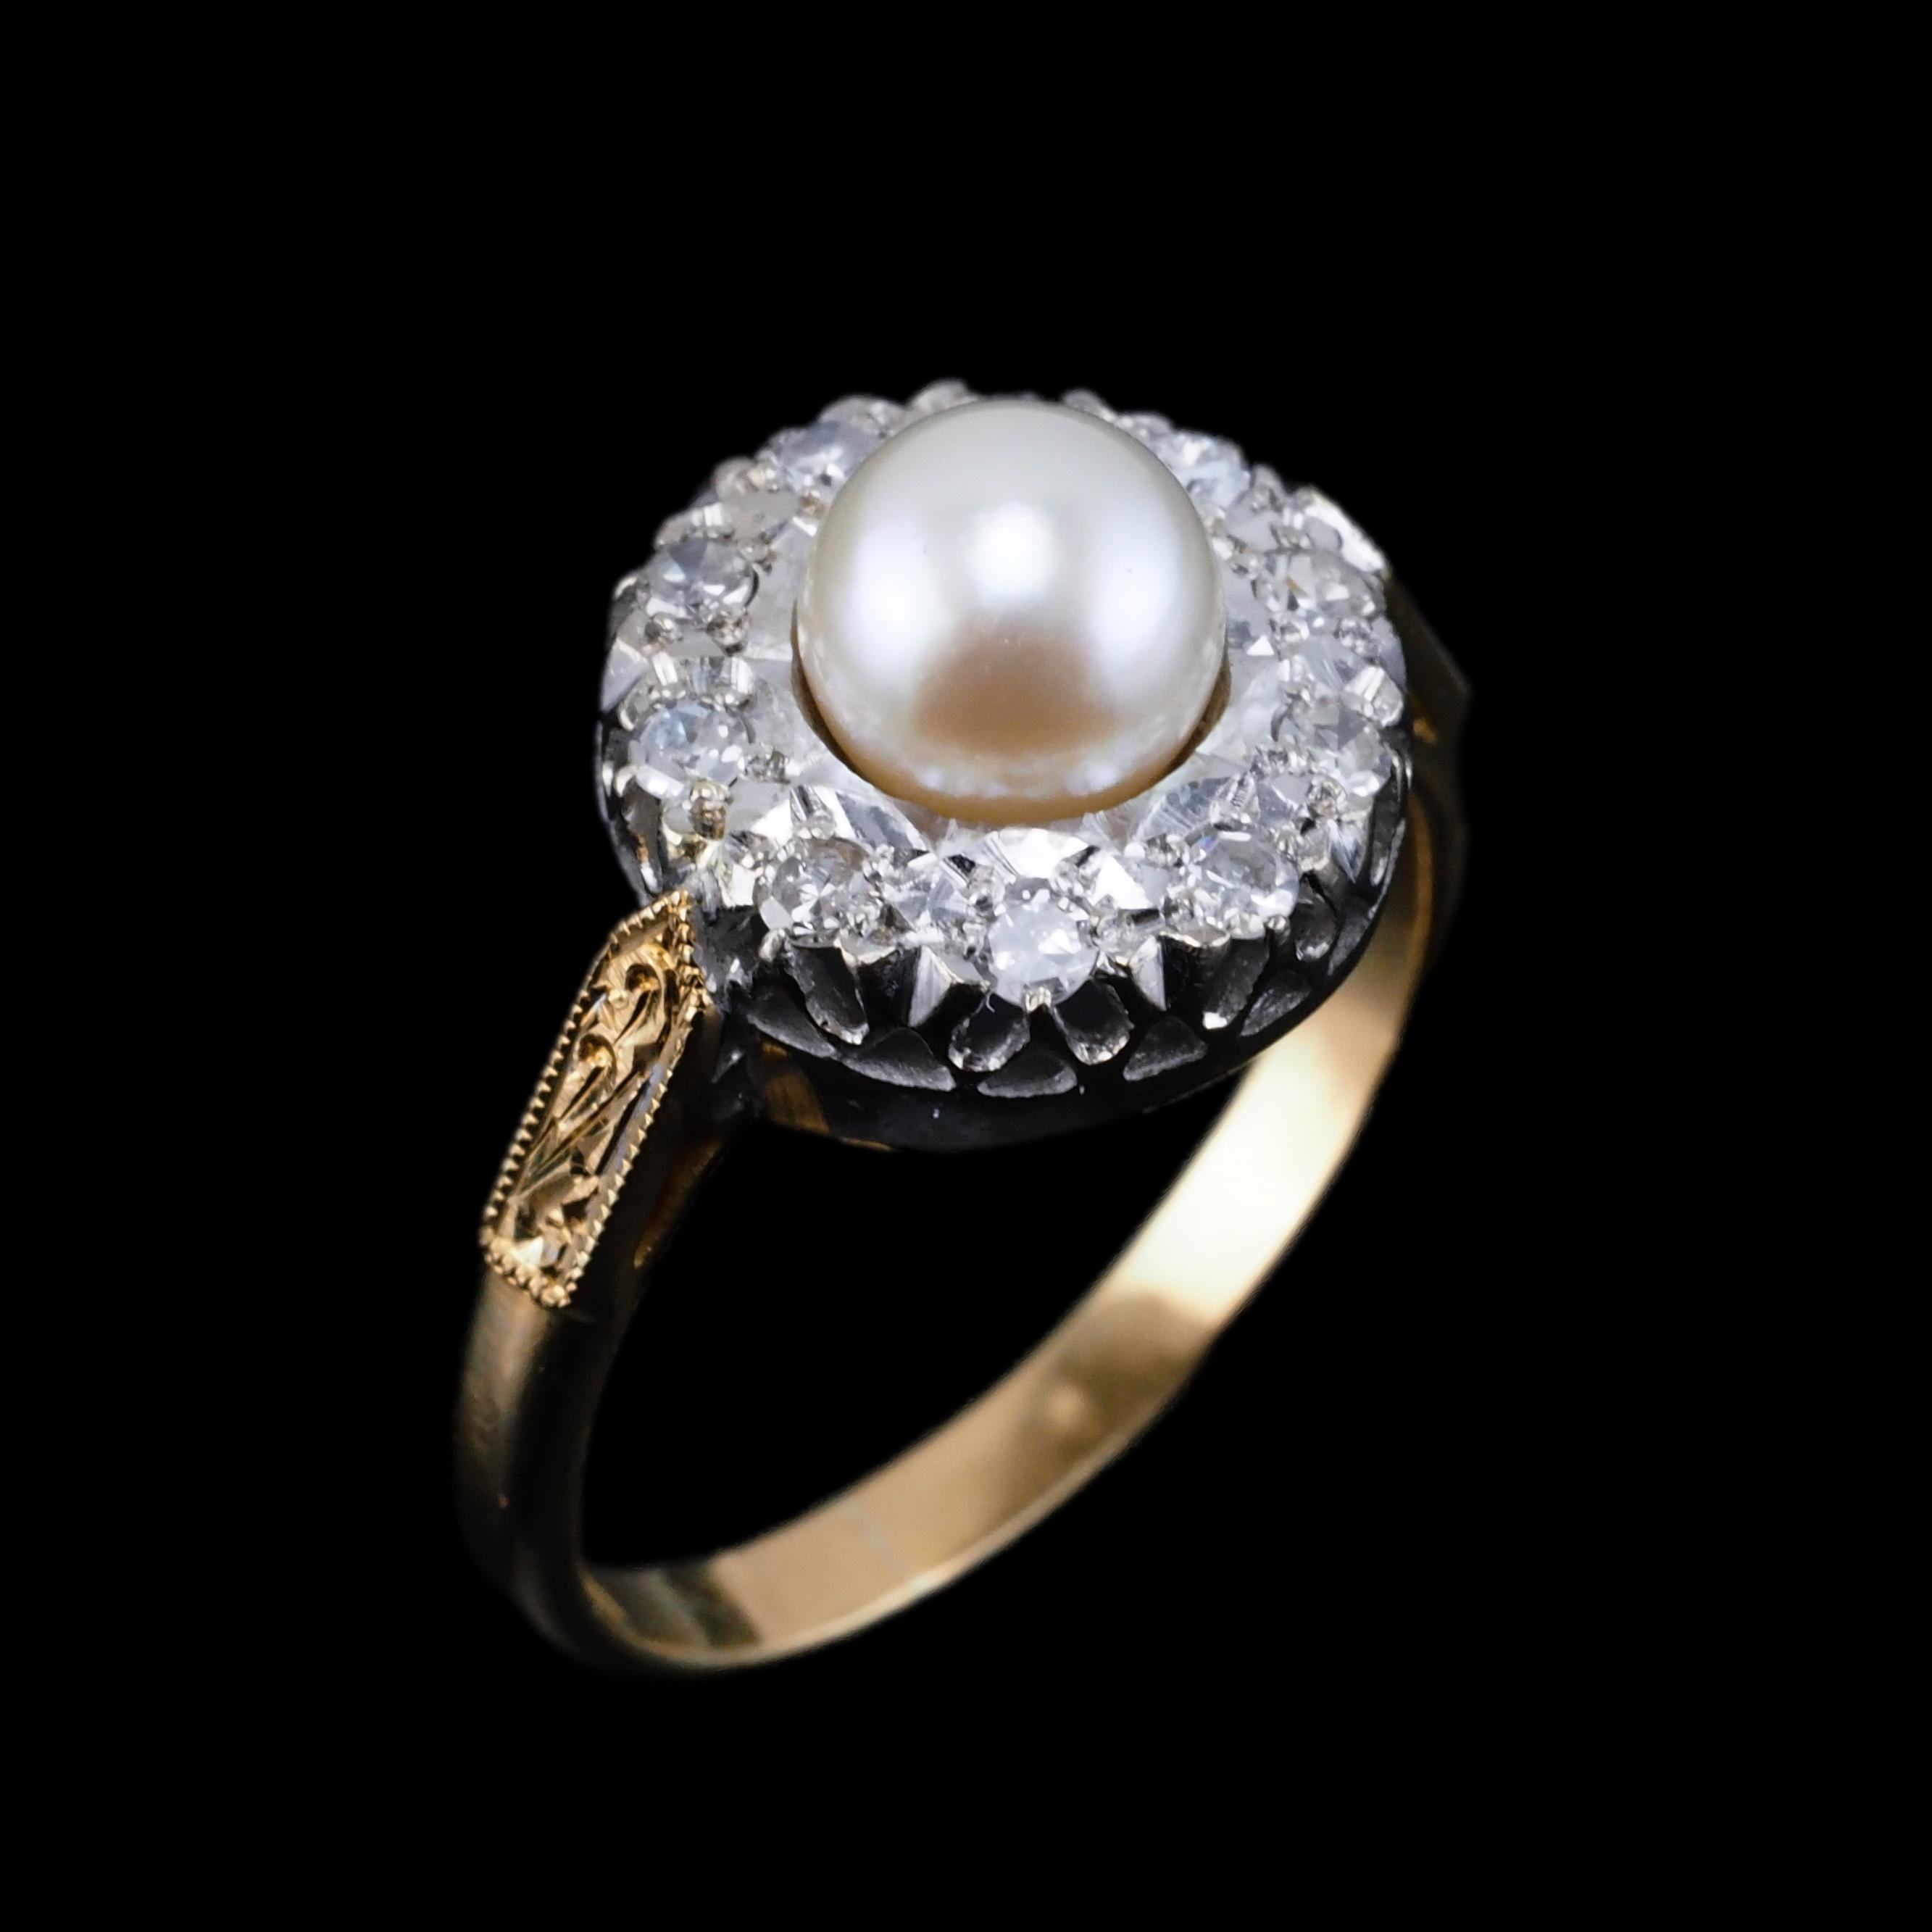 18K Gold Antique Pearl & Diamond Cluster Ring - c.1900s 7